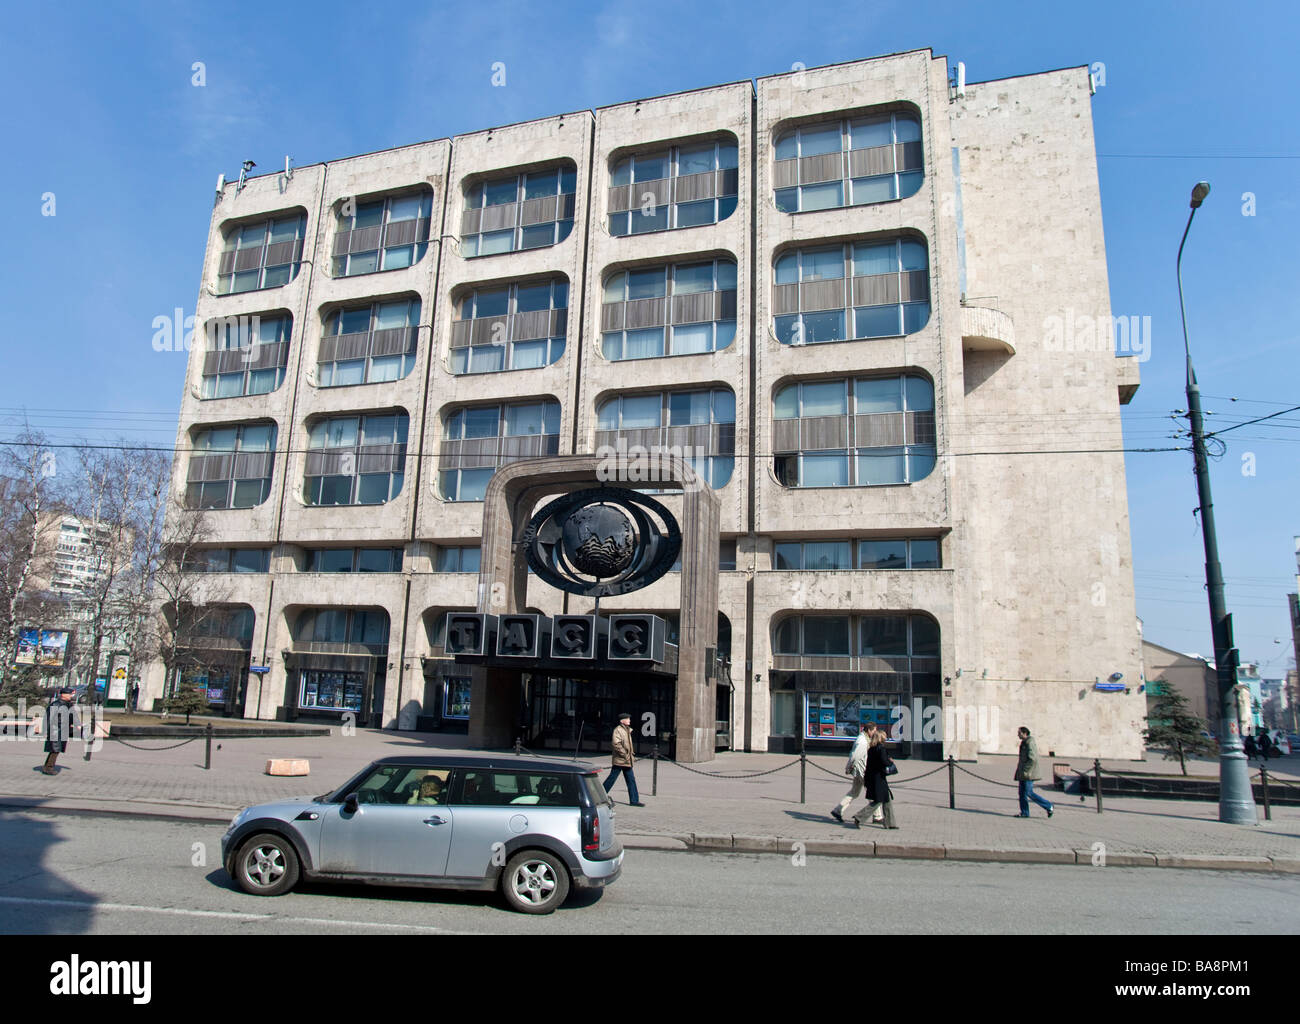 Itar - Tass , Russian news agency building in Moscow, Russia Stock Photo -  Alamy